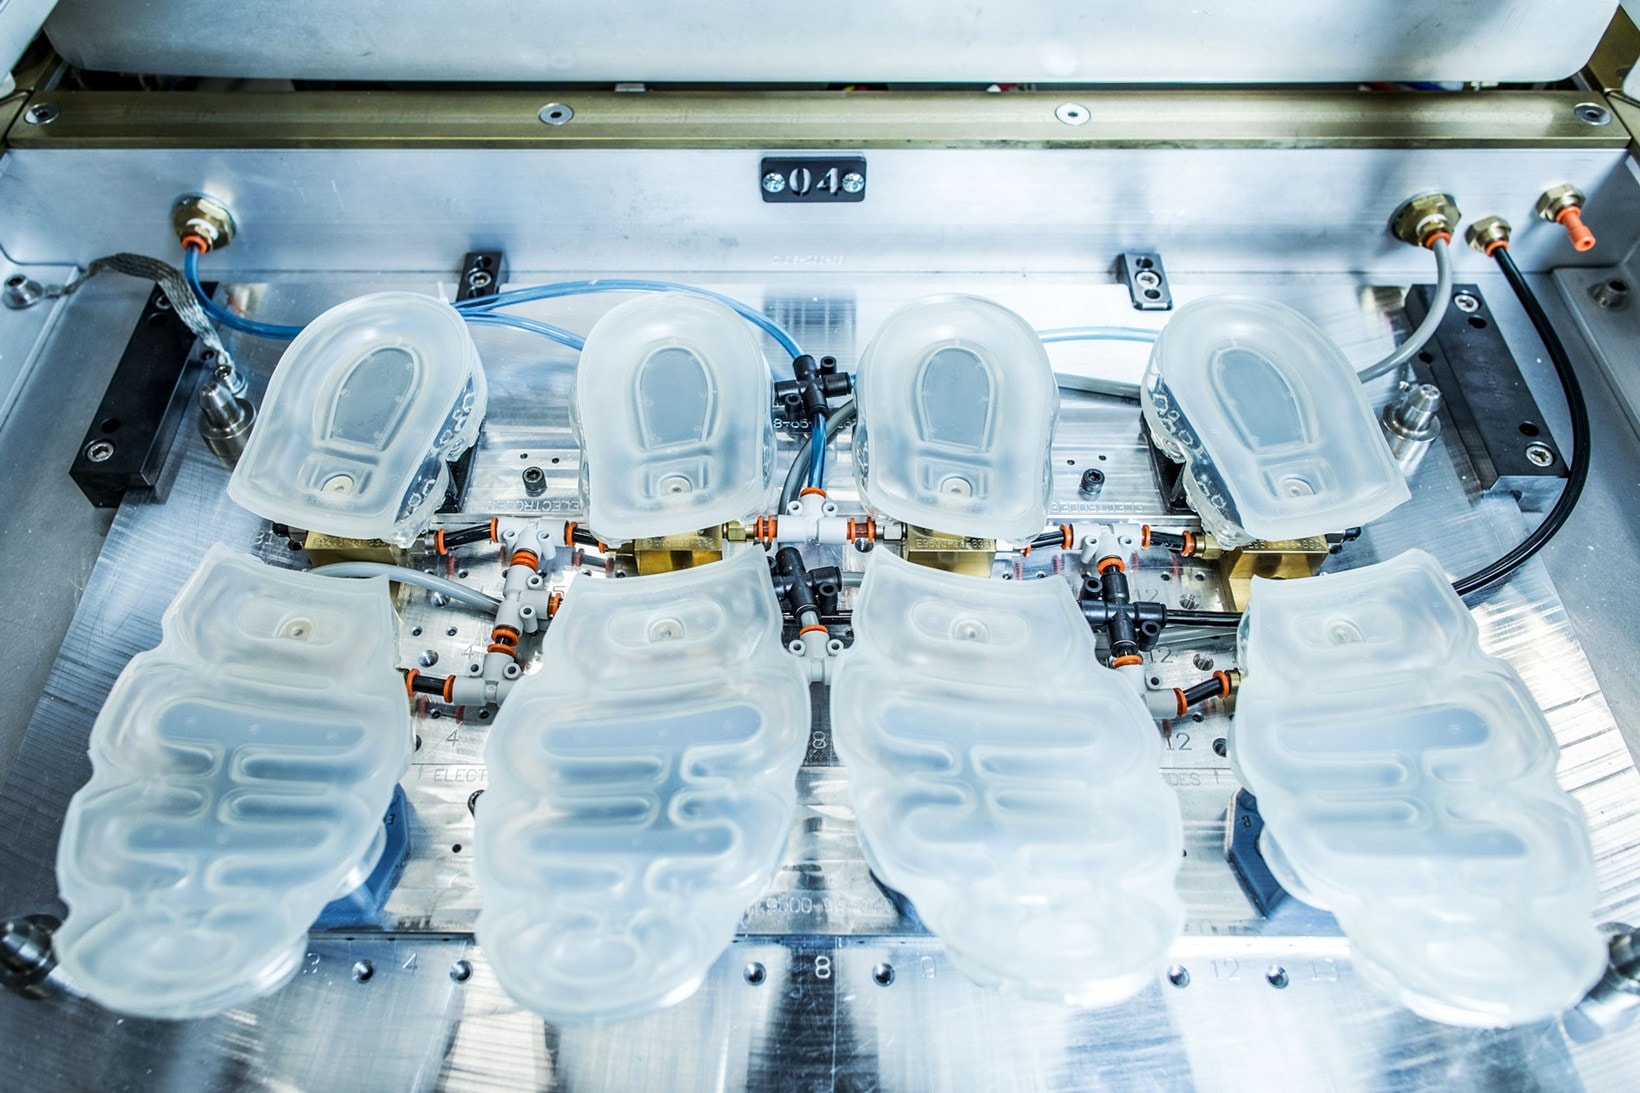 Nike AIR Manufacturing Innovation Facility